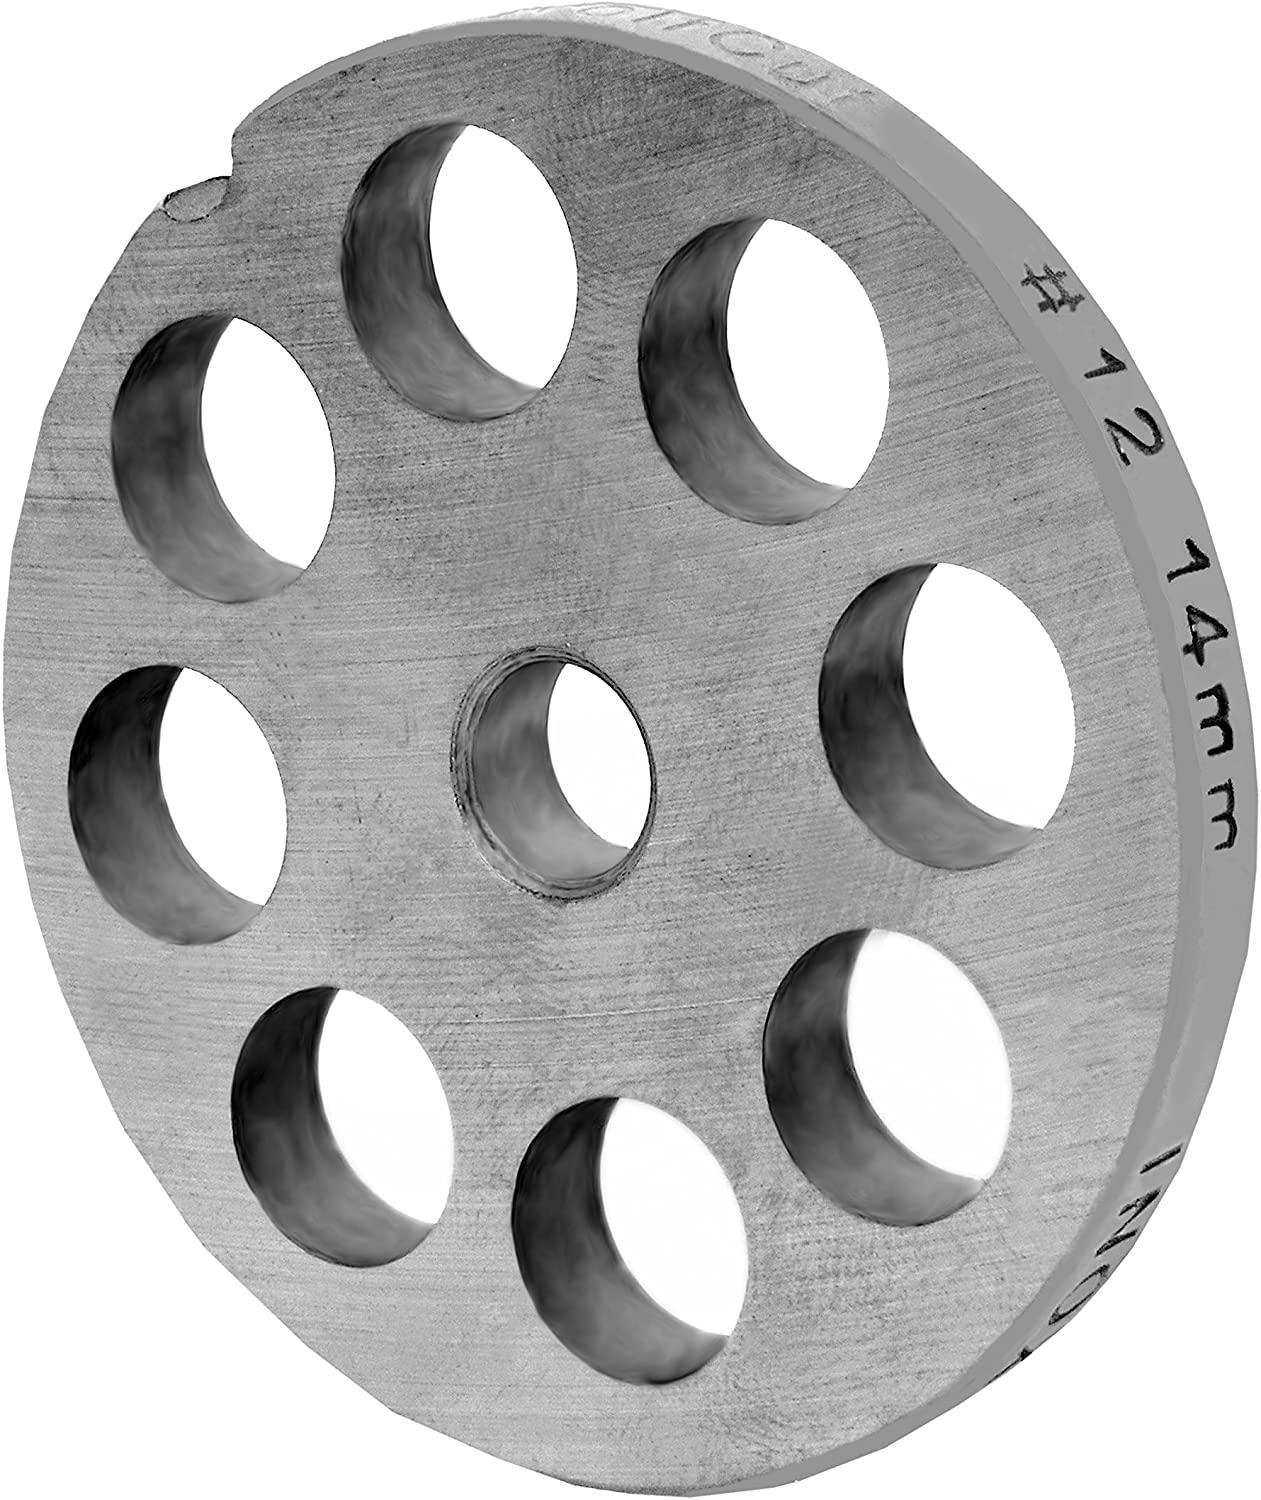 WolfCut Meat grinder discs suitable for Reber sizes 12 (14.0 mm)